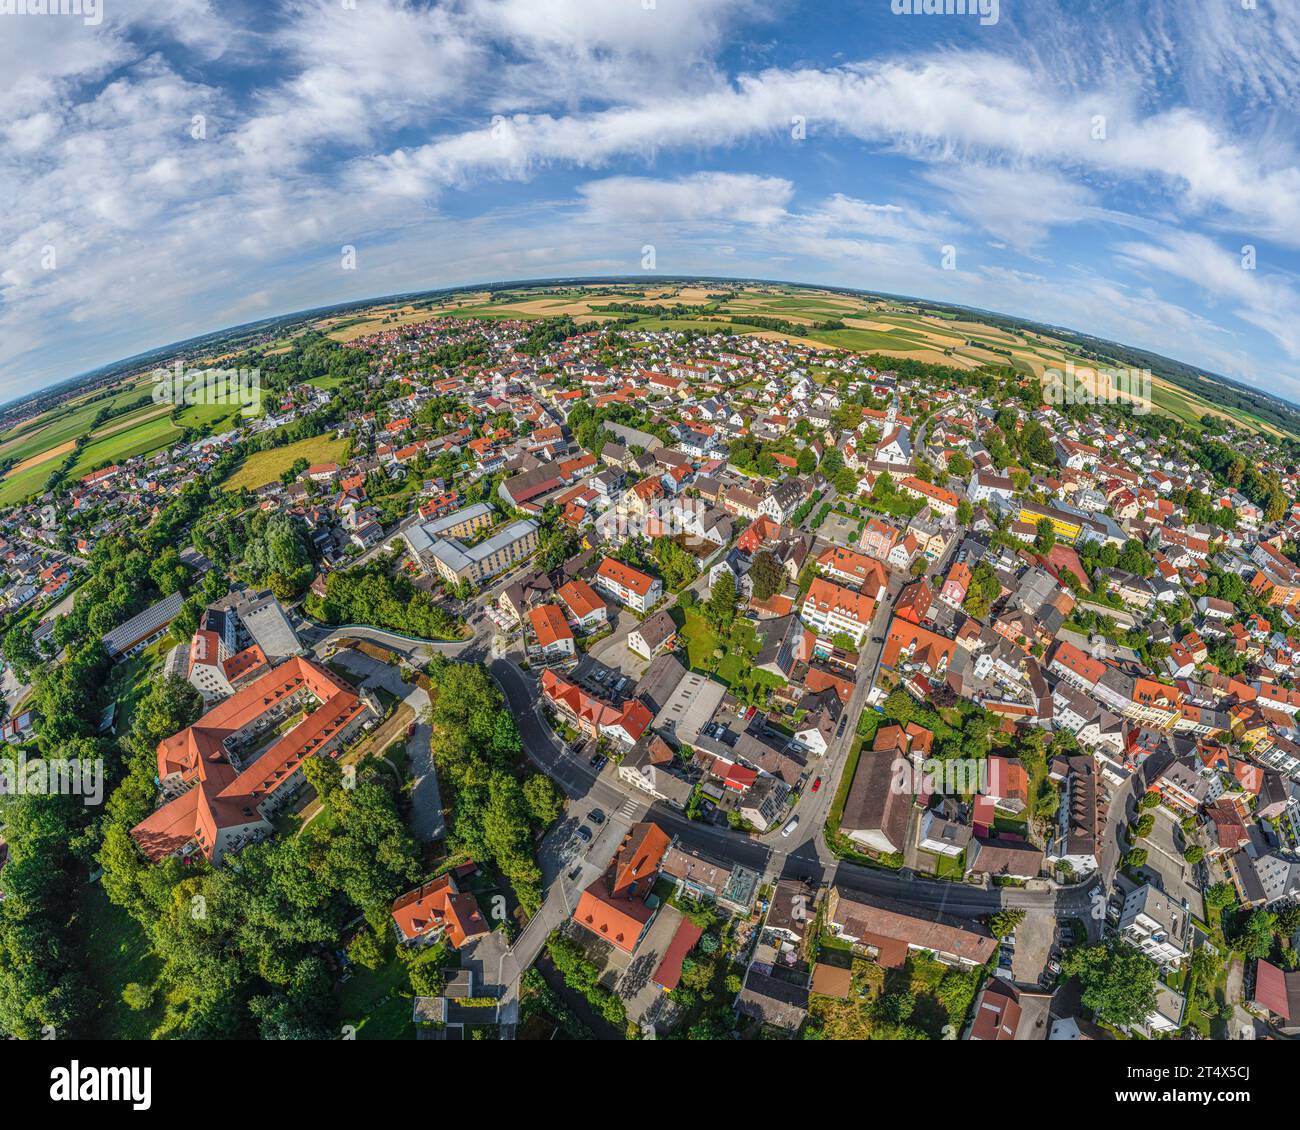 The market community of Mering in swabia from above Stock Photo